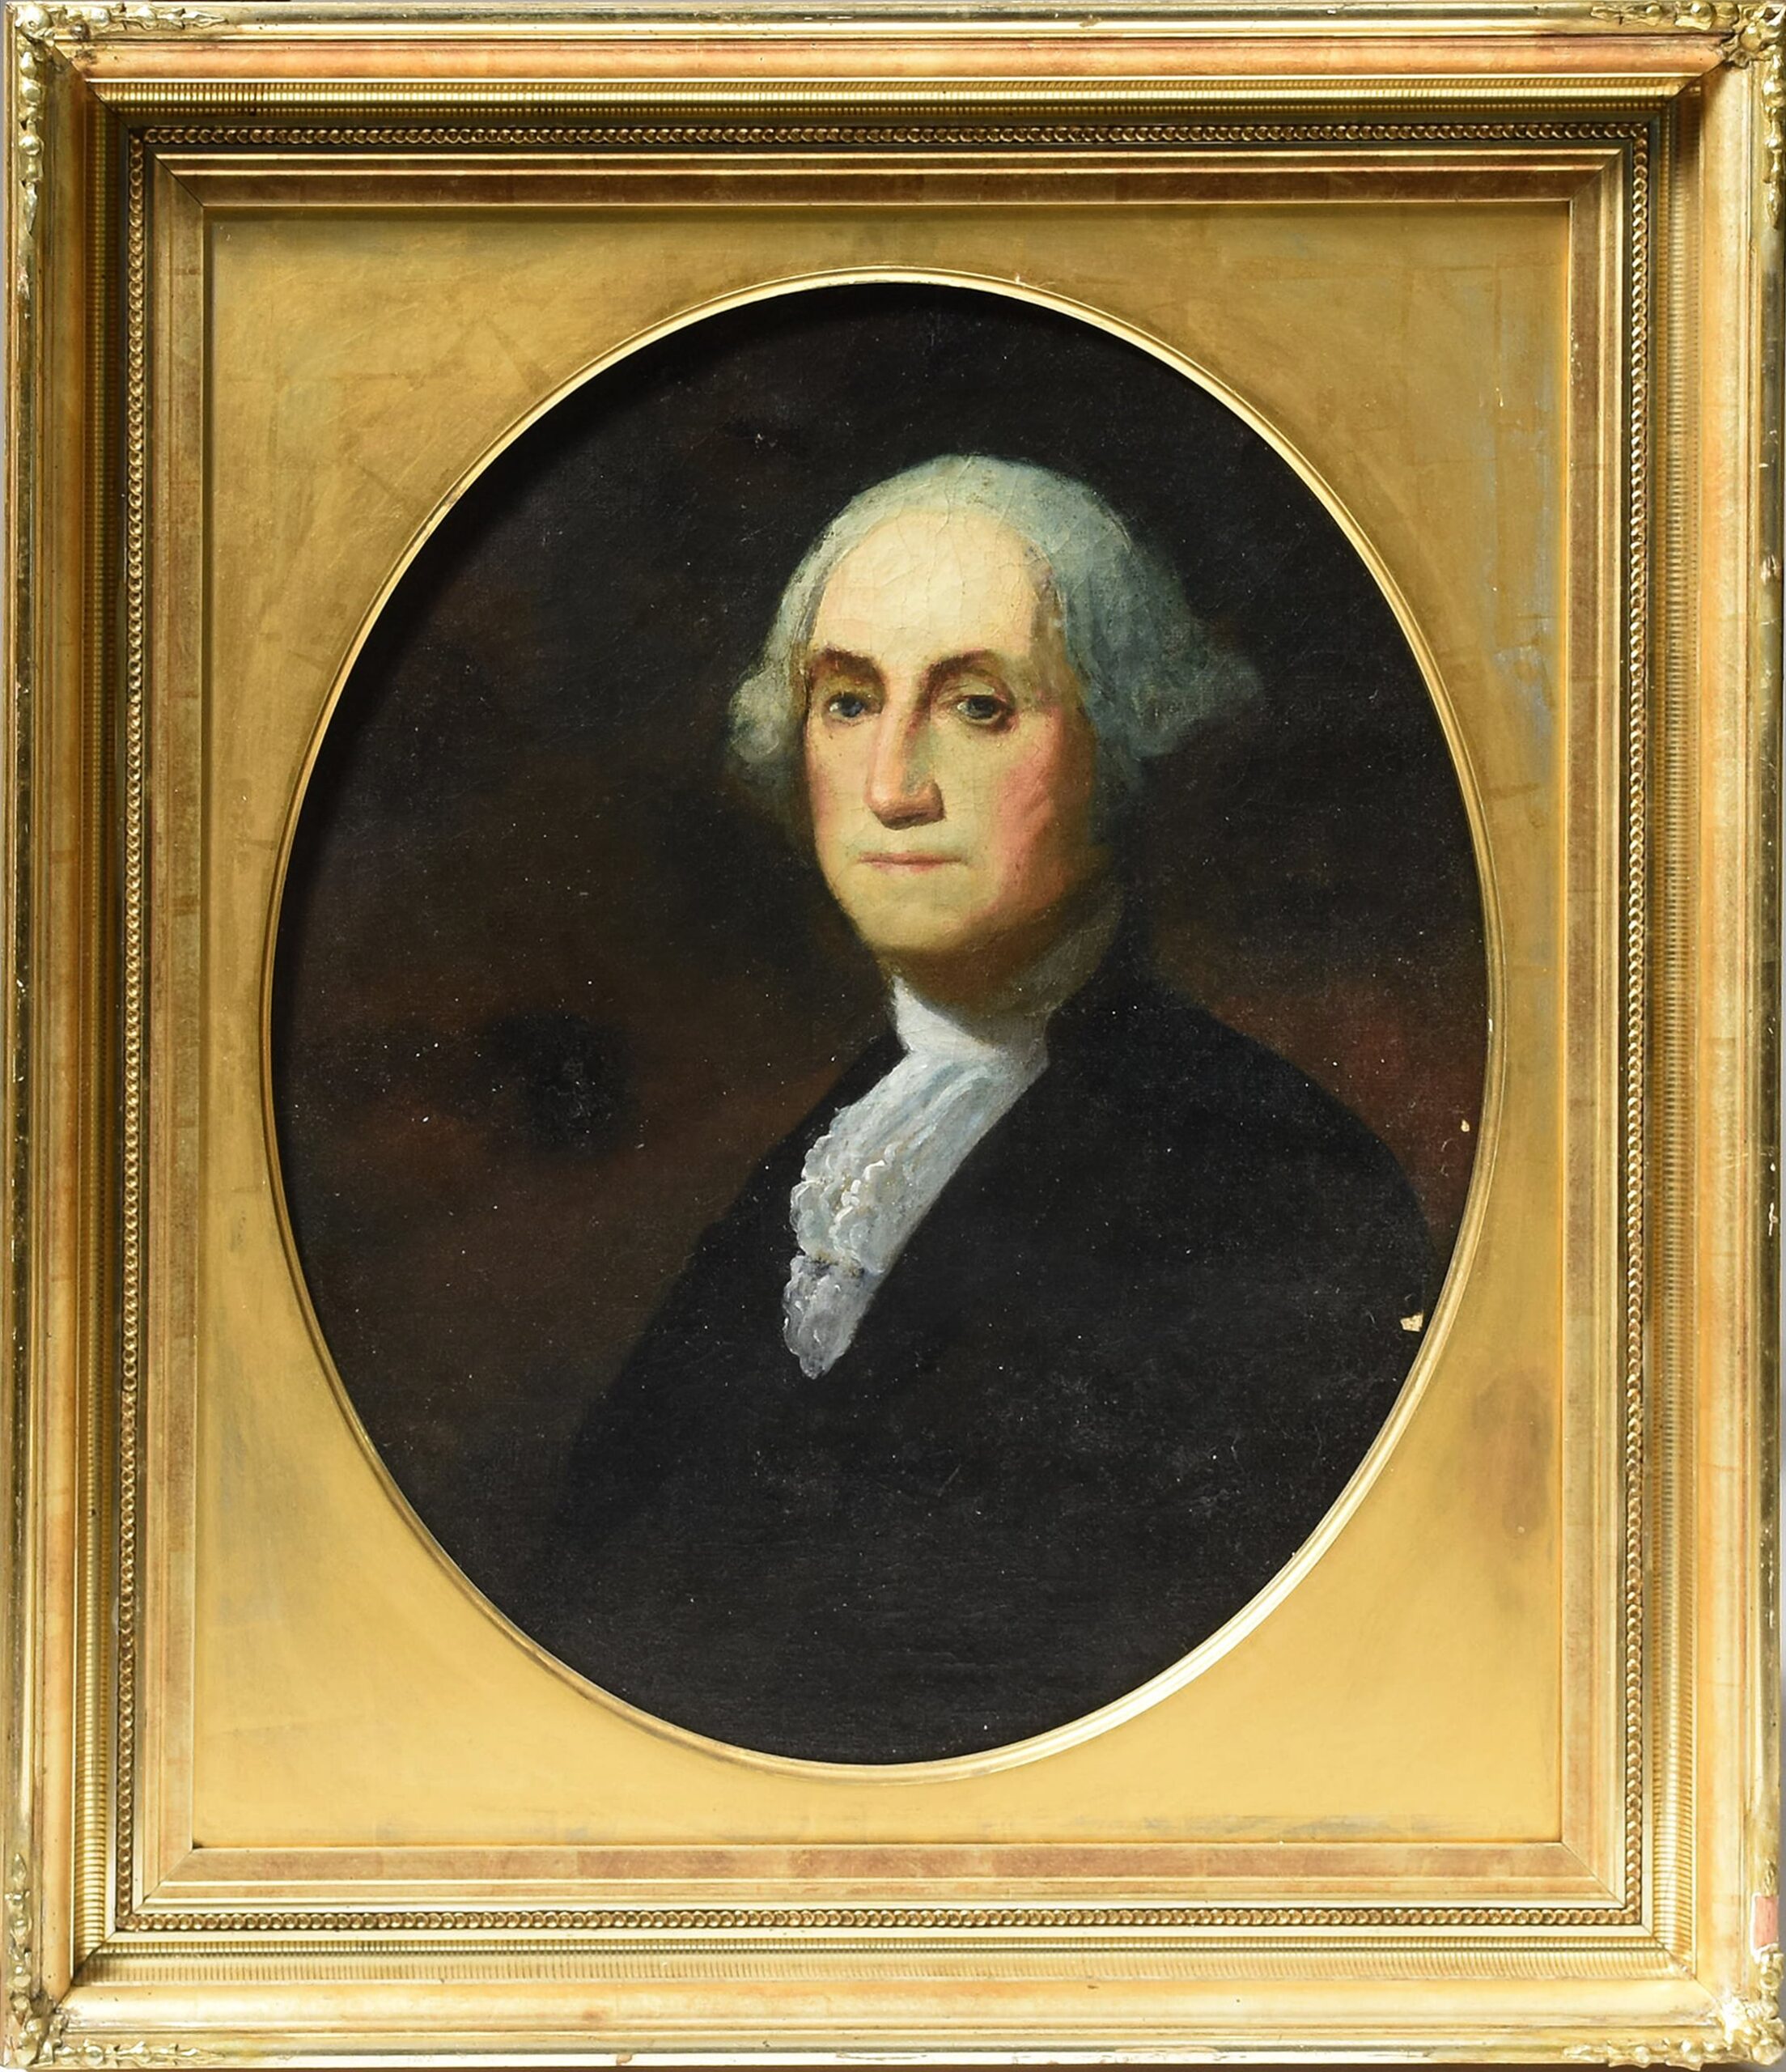 Late 18th / Early 19th C. oil on canvas portrait of George Washington